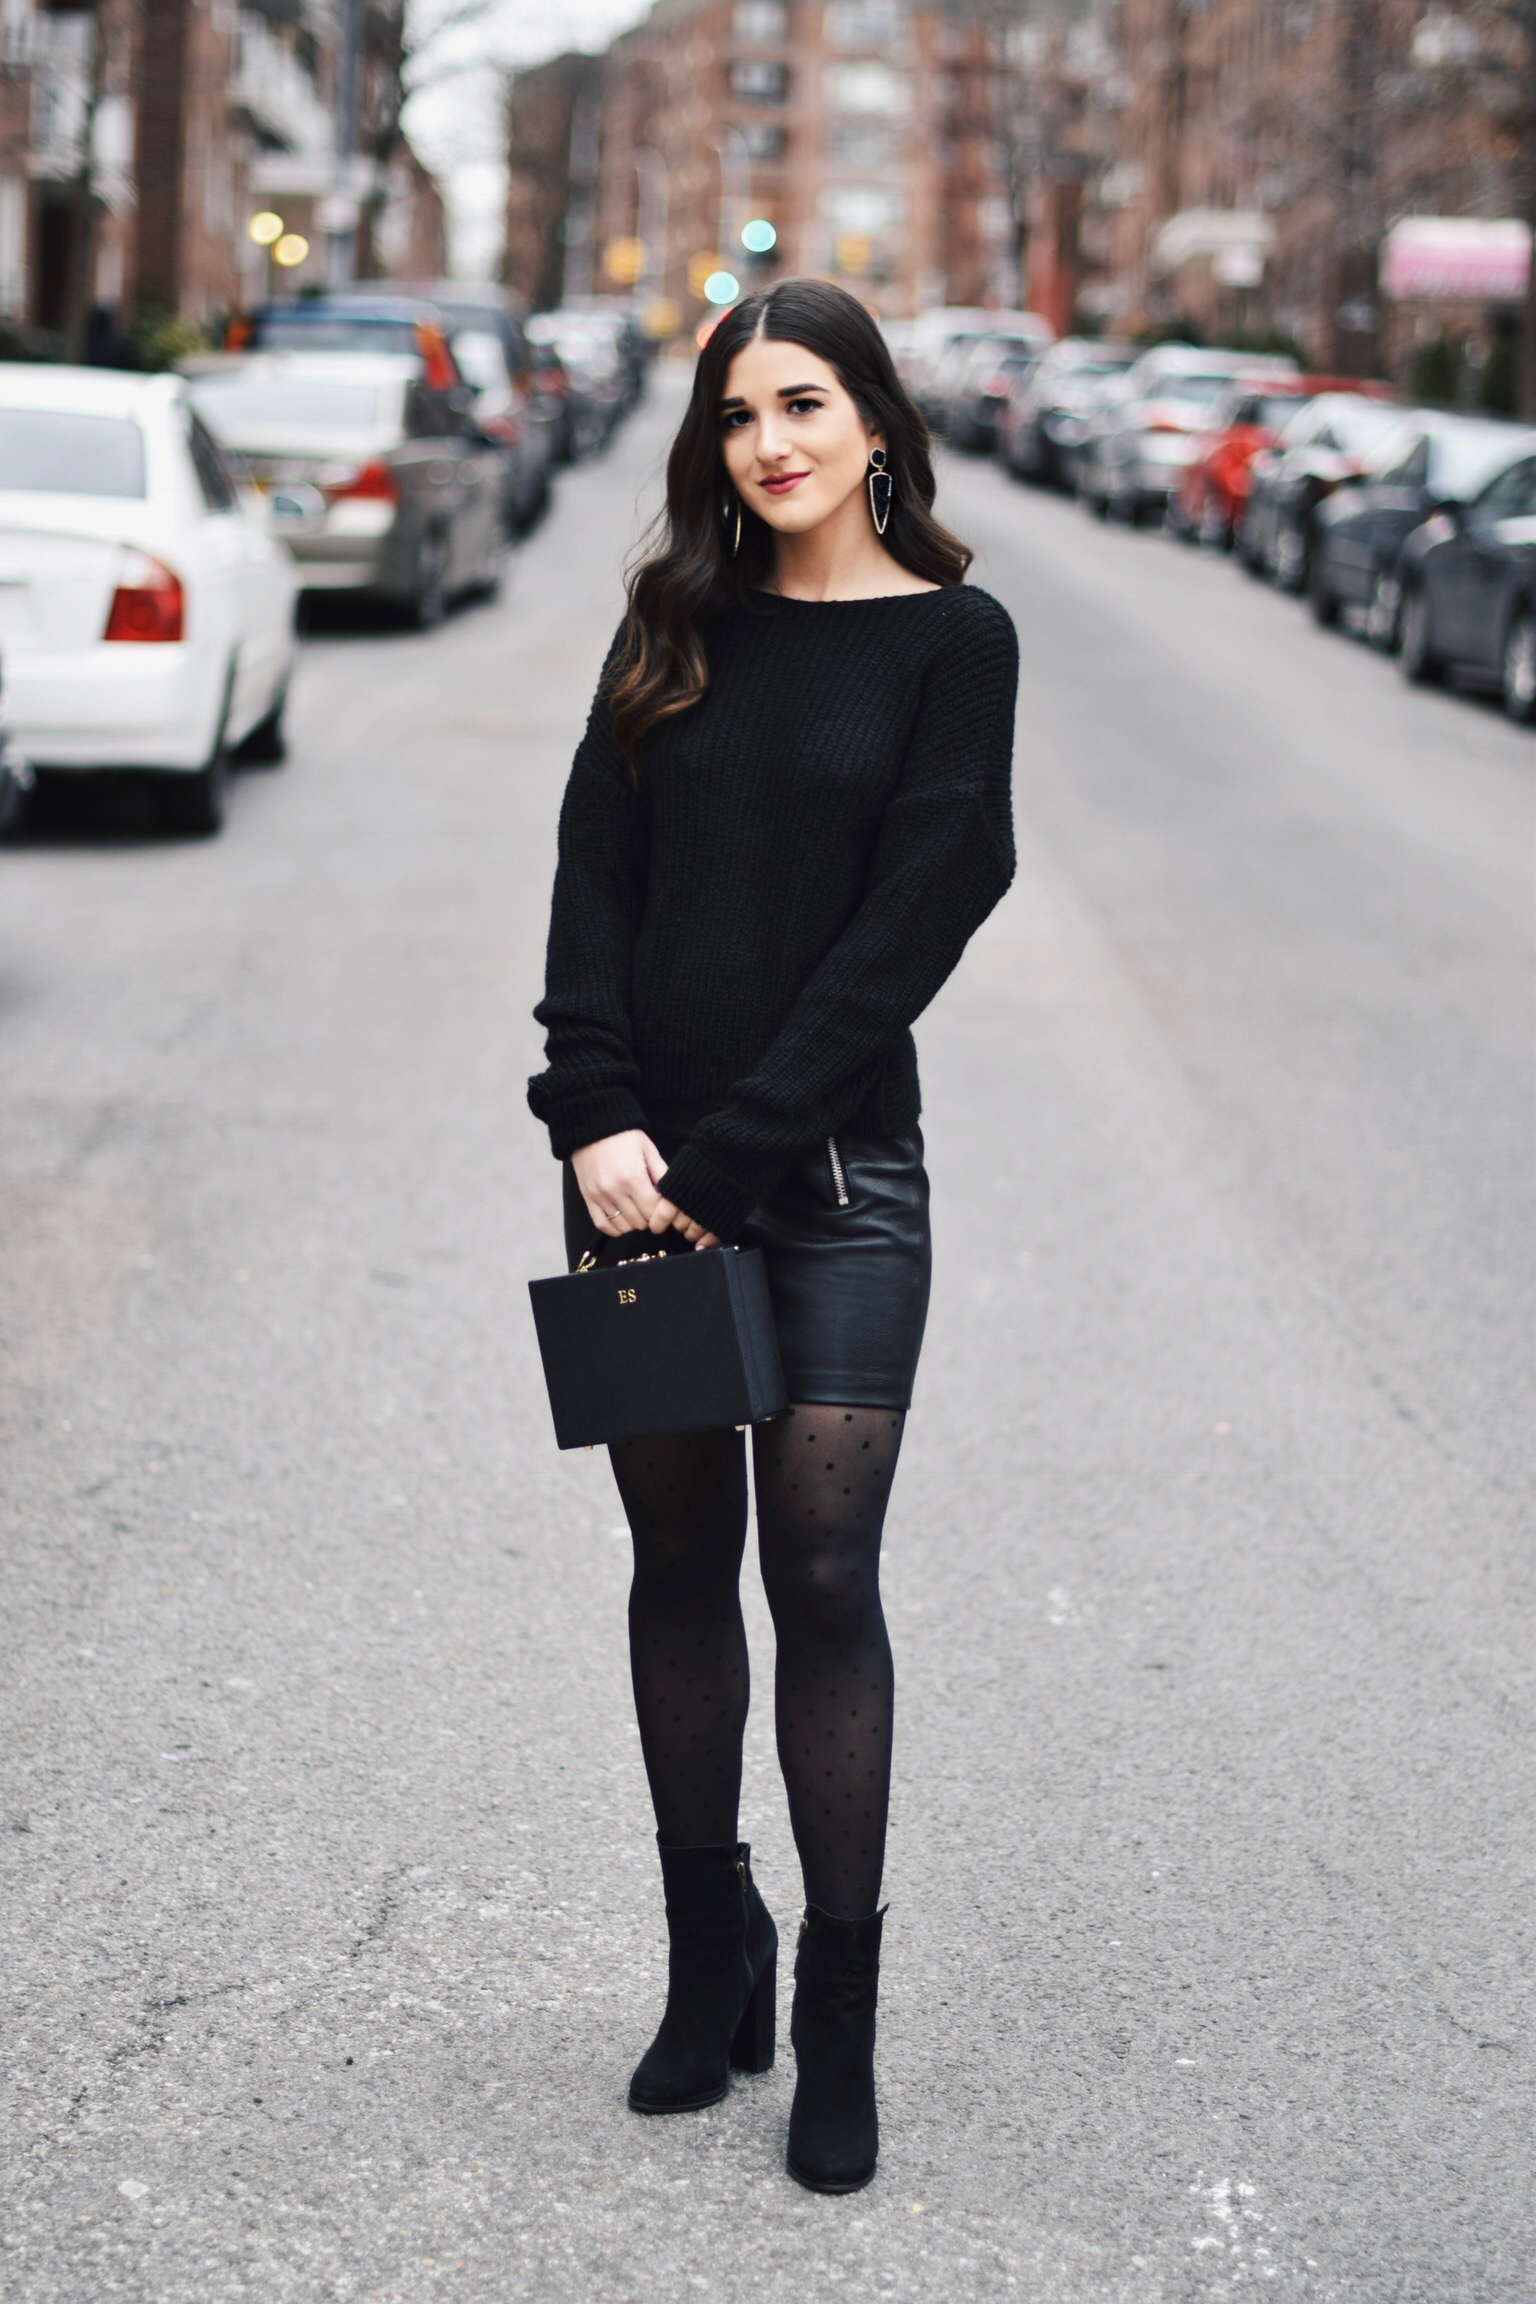 All Black Look 5 Ways To Keep Your New Year's Resolution Going Strong Esther Santer Fashion Blog NYC Street Style Blogger Outfit OOTD Trendy BaubleBar Earrings Monogrammed Box Bag Daily Edited Girl Women Booties Pleather Mini  Skirt Polka Dot Tights.jpg